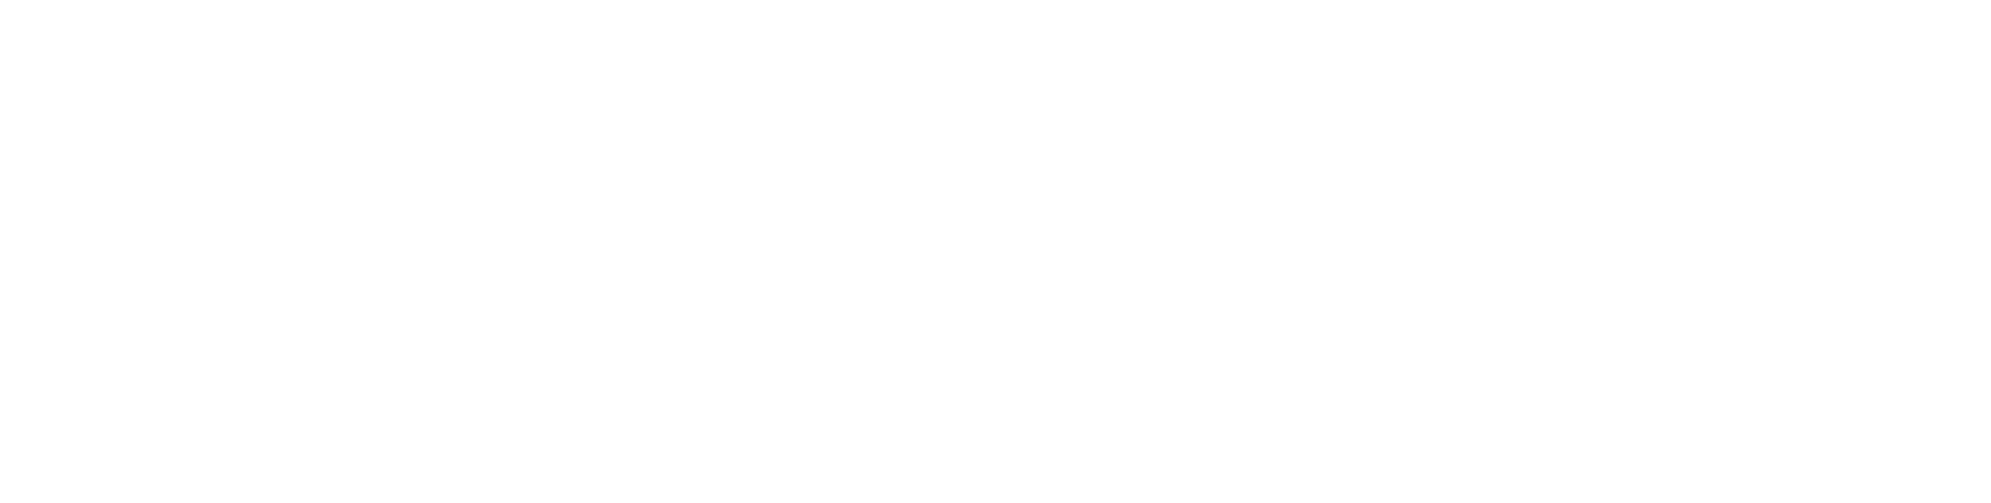 Waterfront Urgent Care